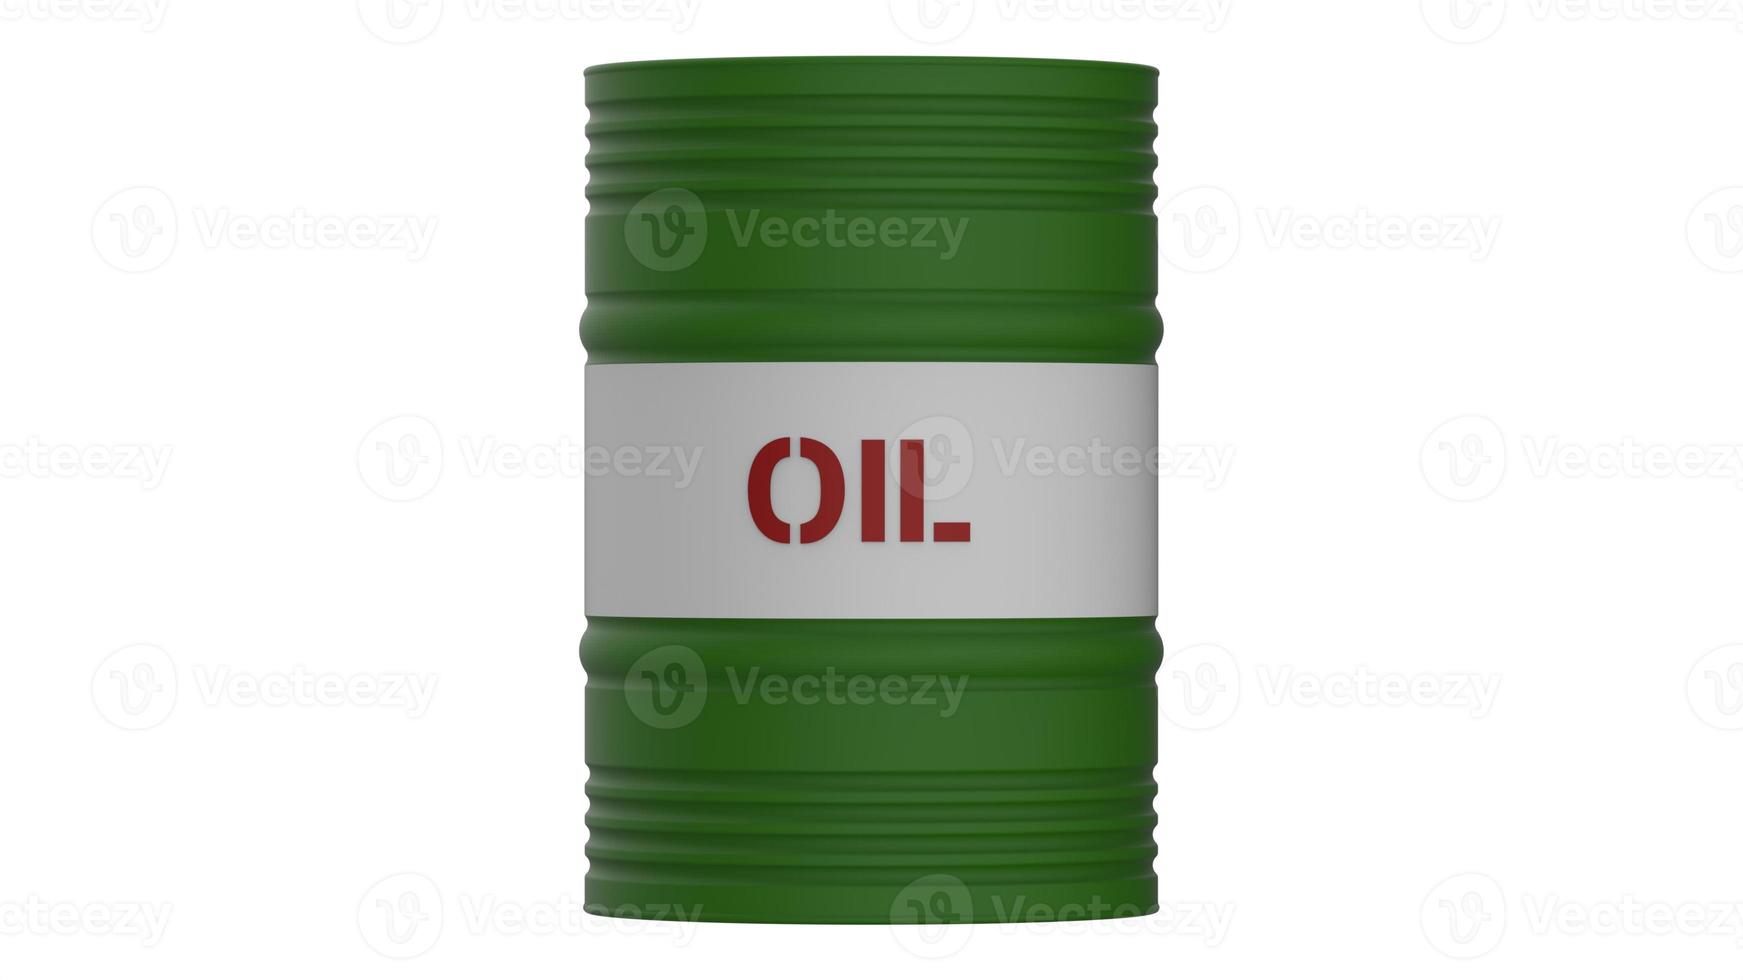 White background illustration with fuel oil gas cylinder 3d render photo